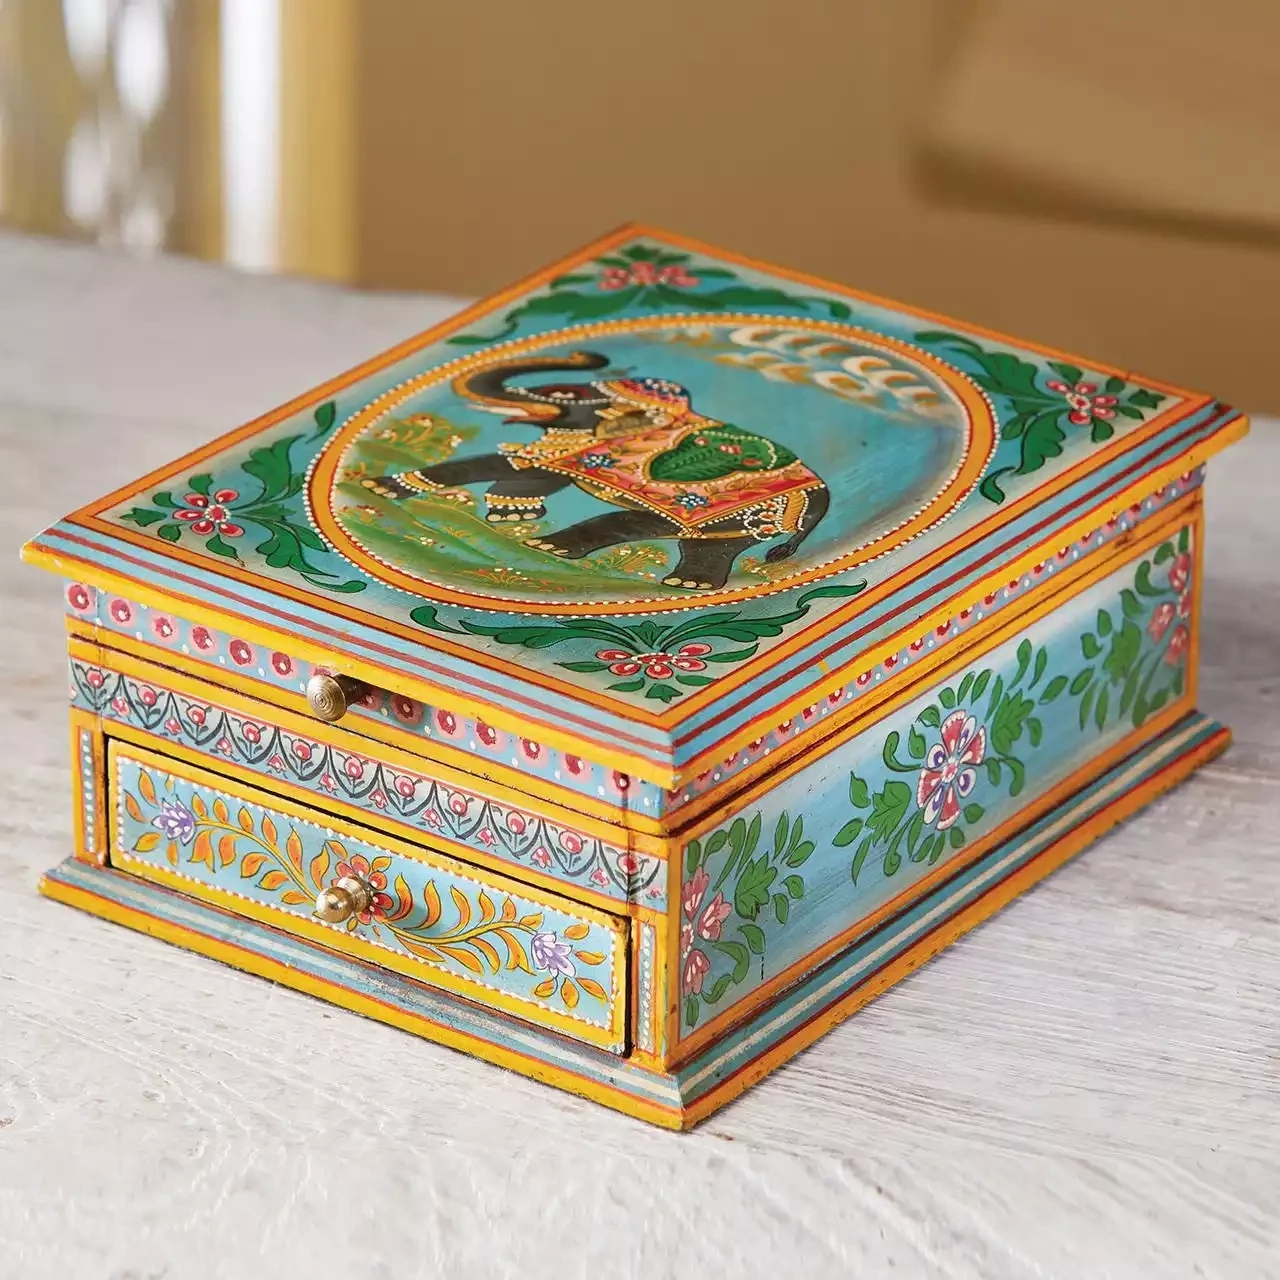 Elephant Hand Painted Wood Jewellery Box With One Drawer by Namaste